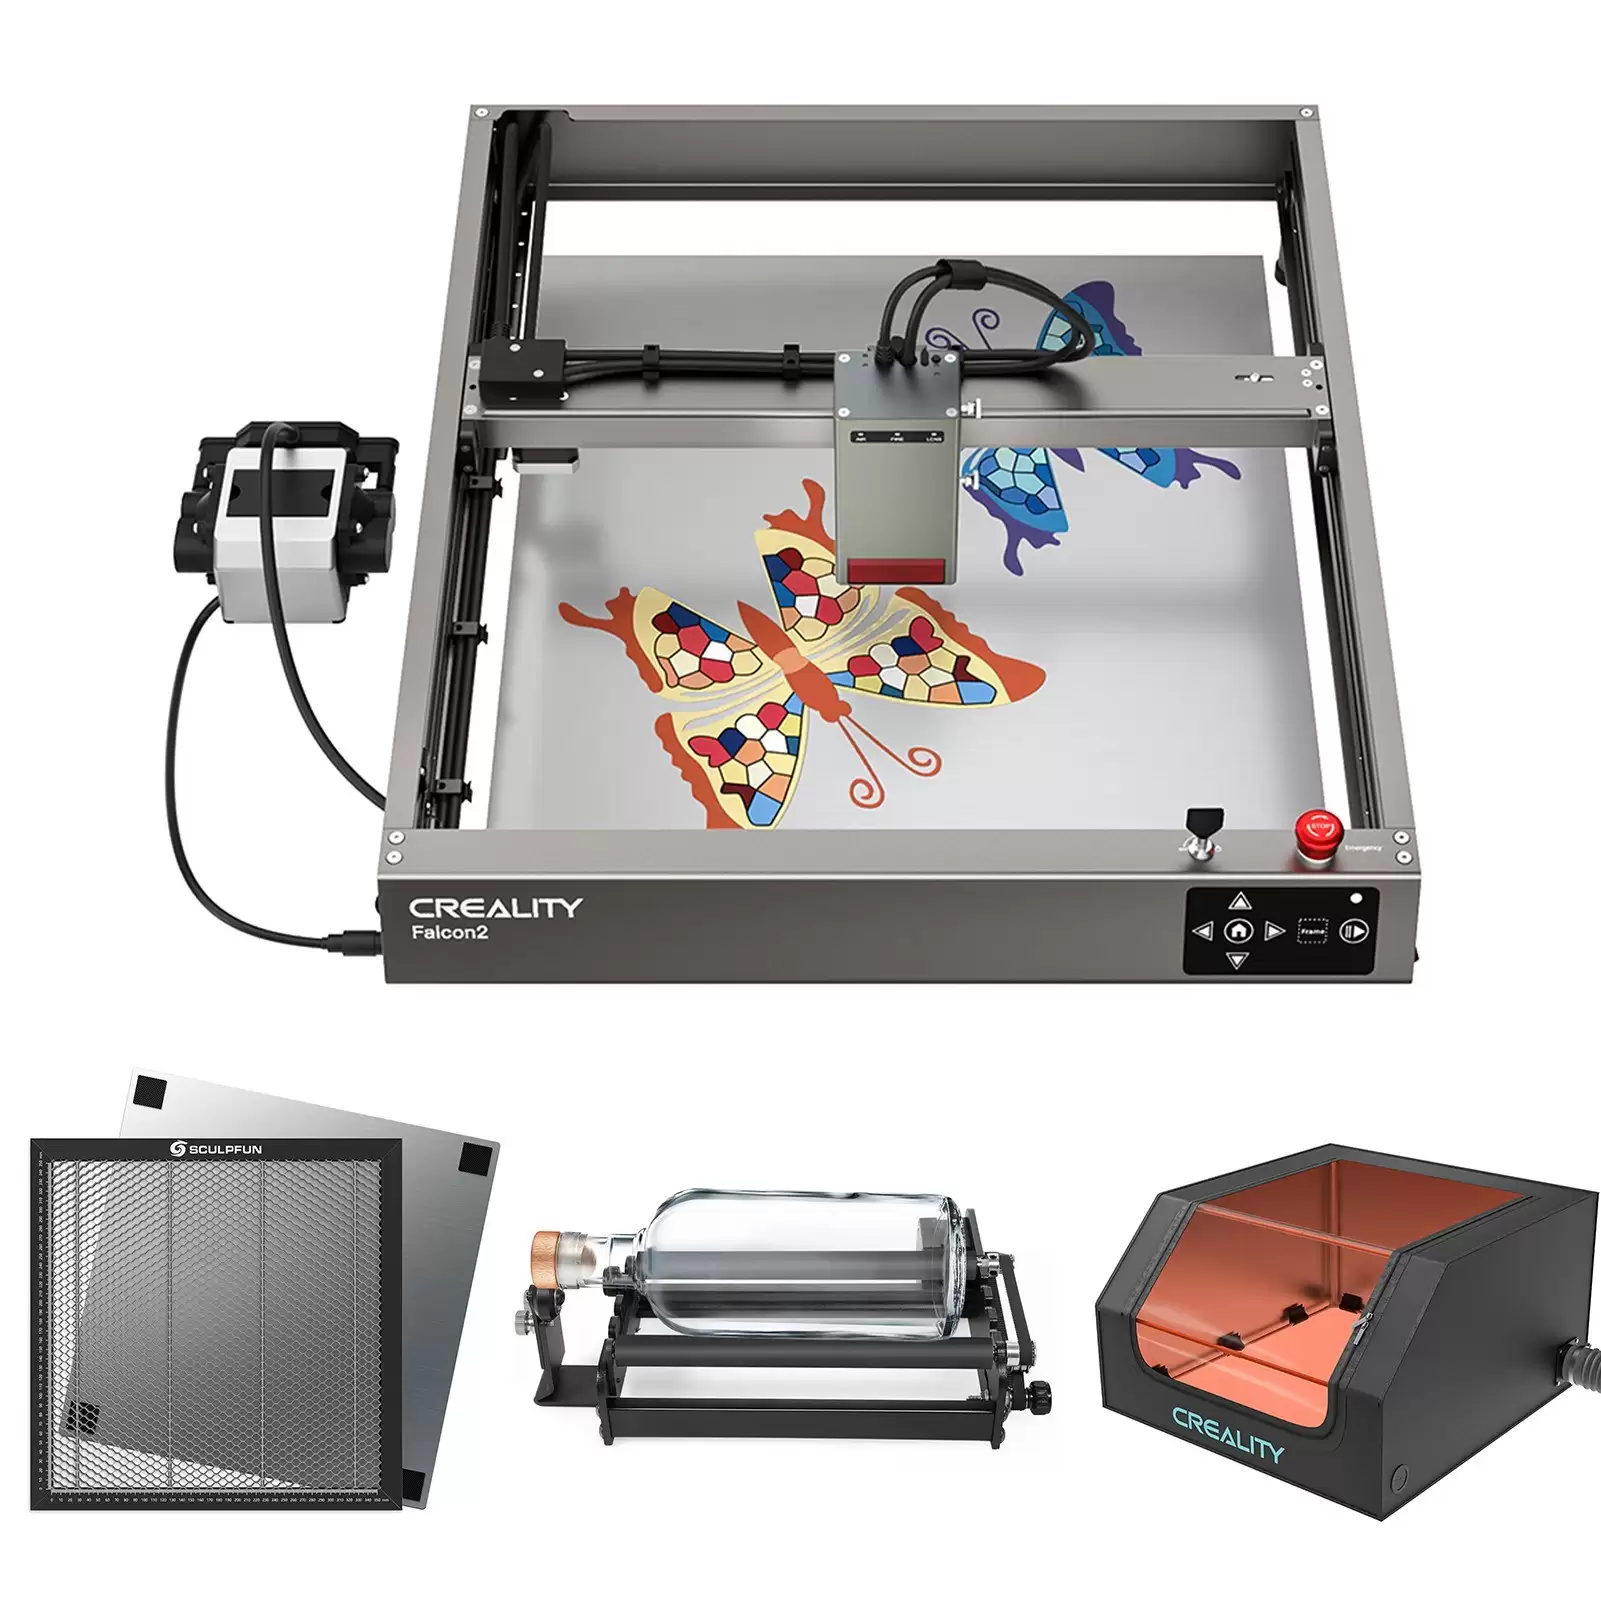 Order In Just $1169 Creality Falcon2 40w Laser Engraver With Integrated Air Assist System And 400x400mm Honeycomb Working Table And Rotary Roller And 700x720x400mm Protective Box At Tomtop